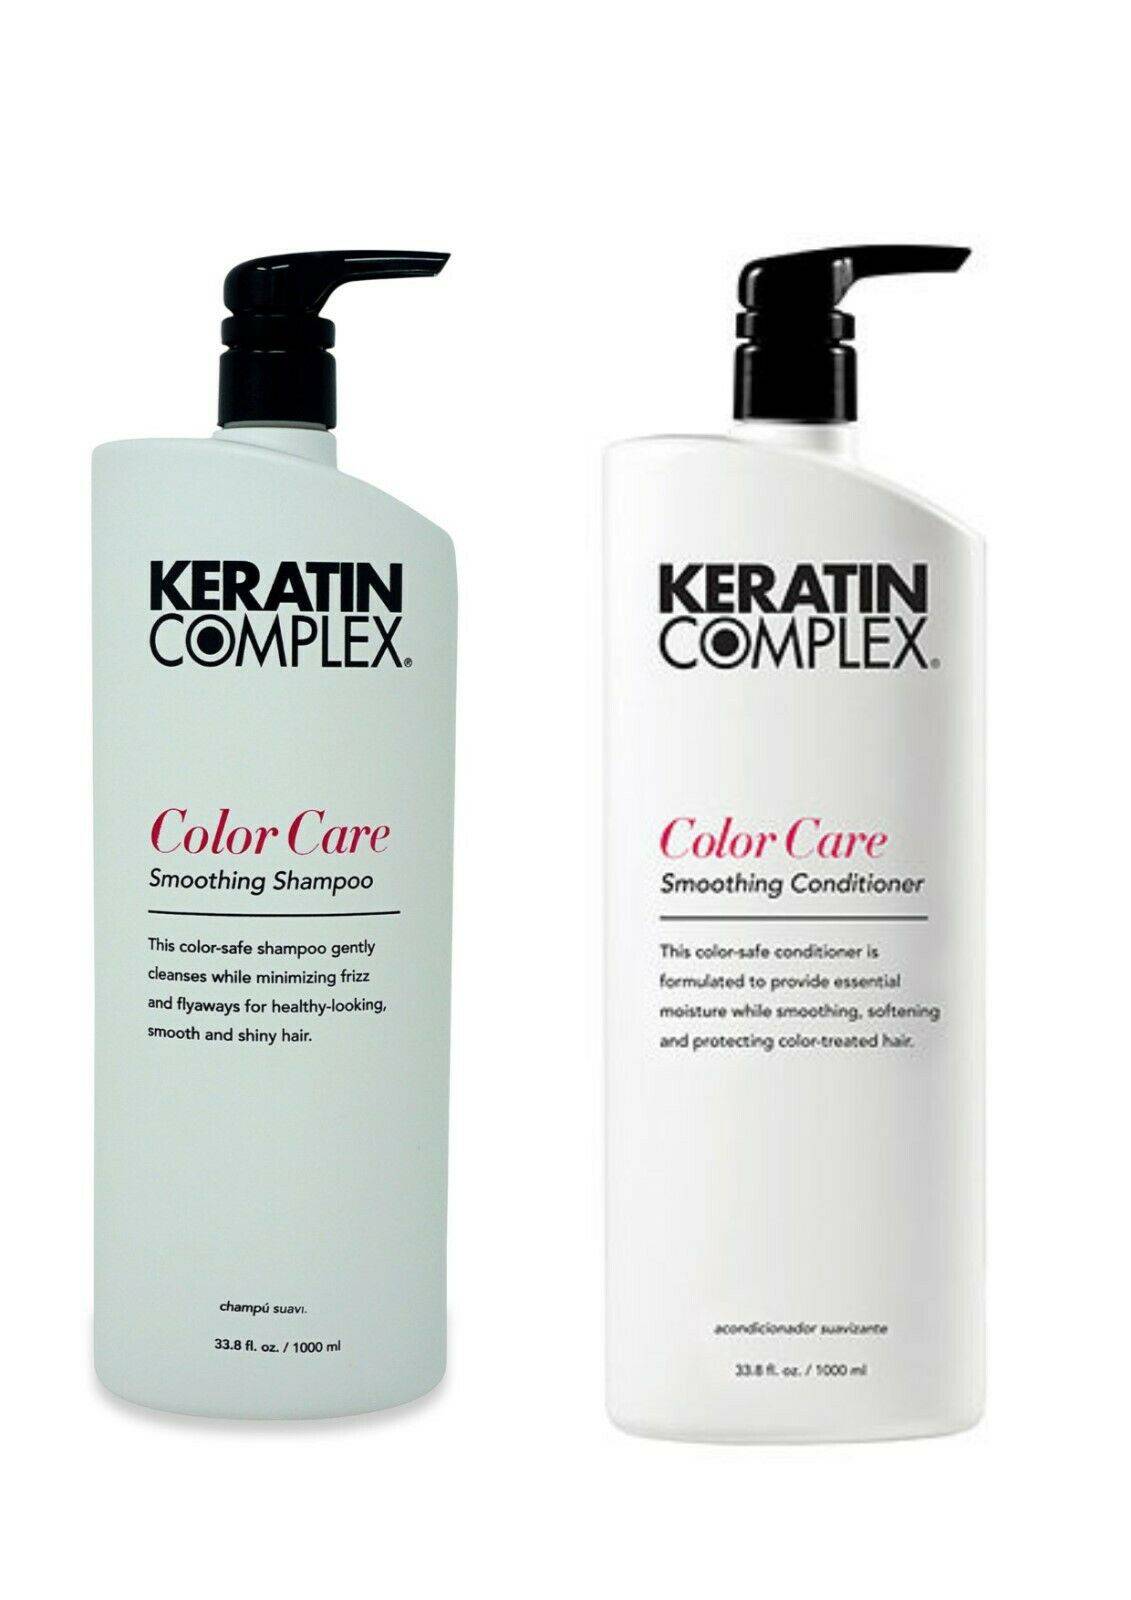 Keratin Complex Color Care Shampoo & Conditioner Duo 1lt with Pumps - On Line Hair Depot